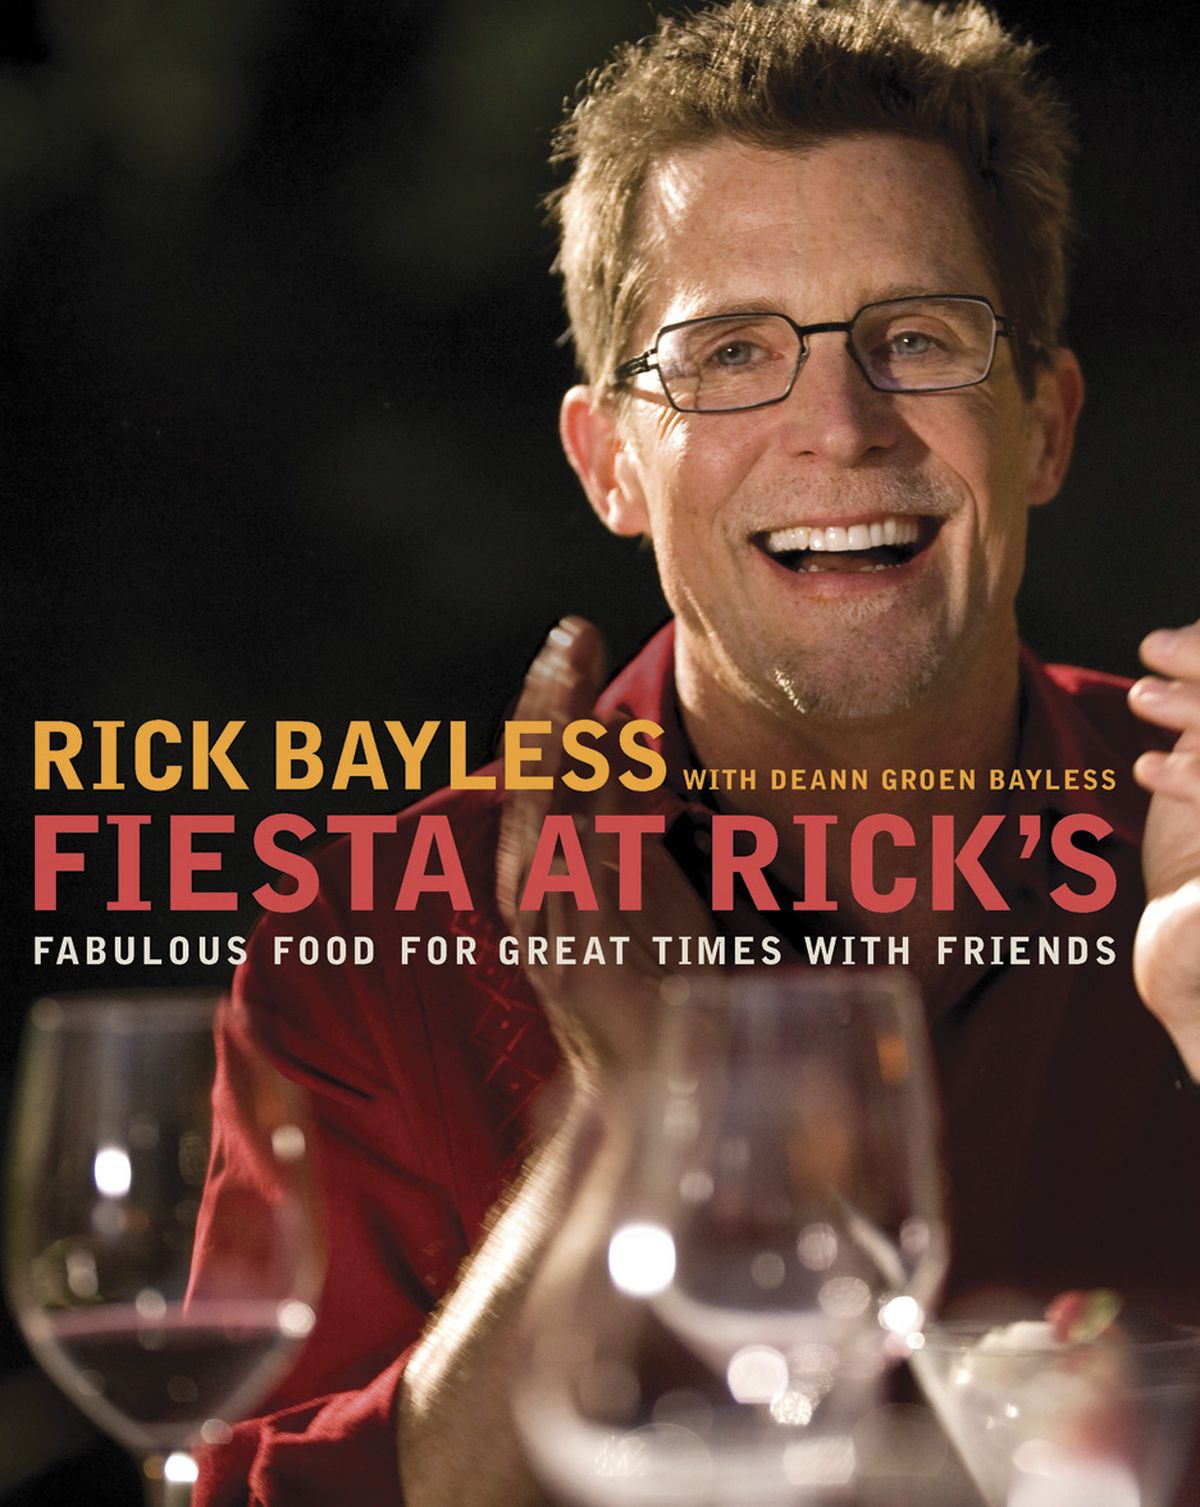  “Fiesta at Rick’s,” is a cookbook by Rick Bayless. (Associated Press)